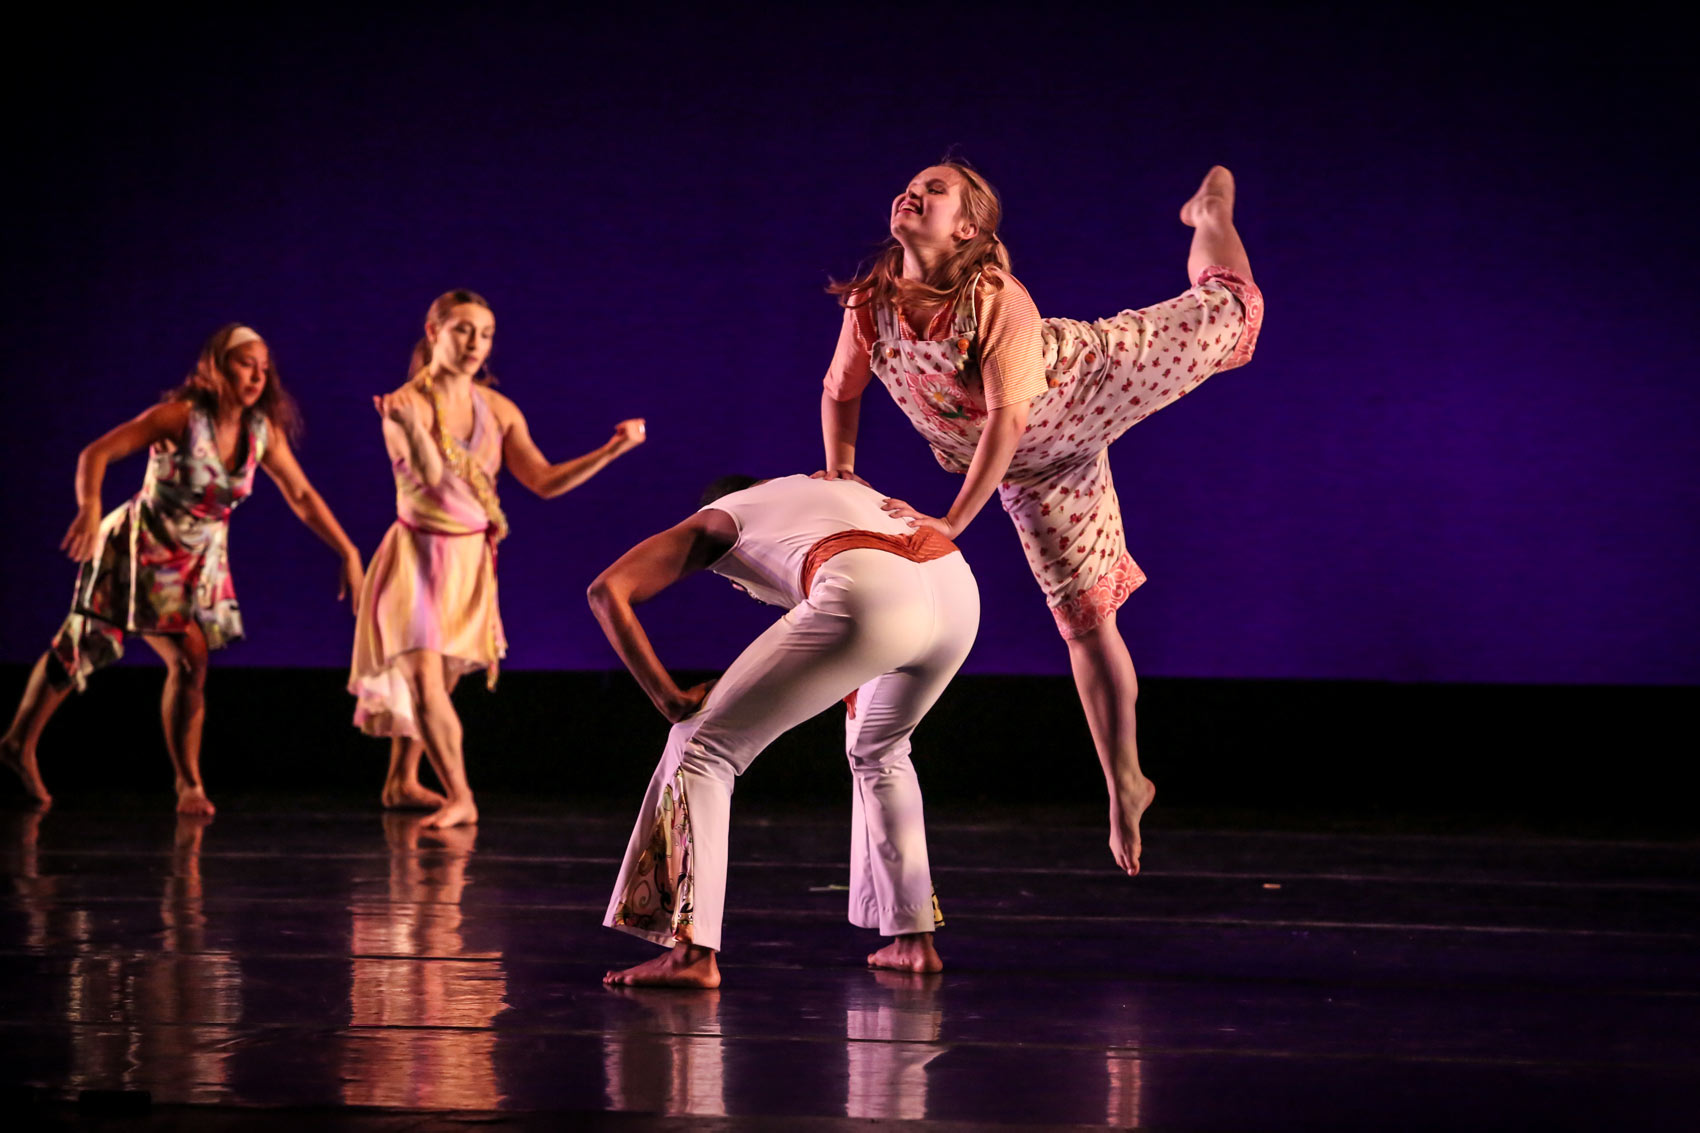 A dancer leaps up joyfully while using the back of another dancer for support.